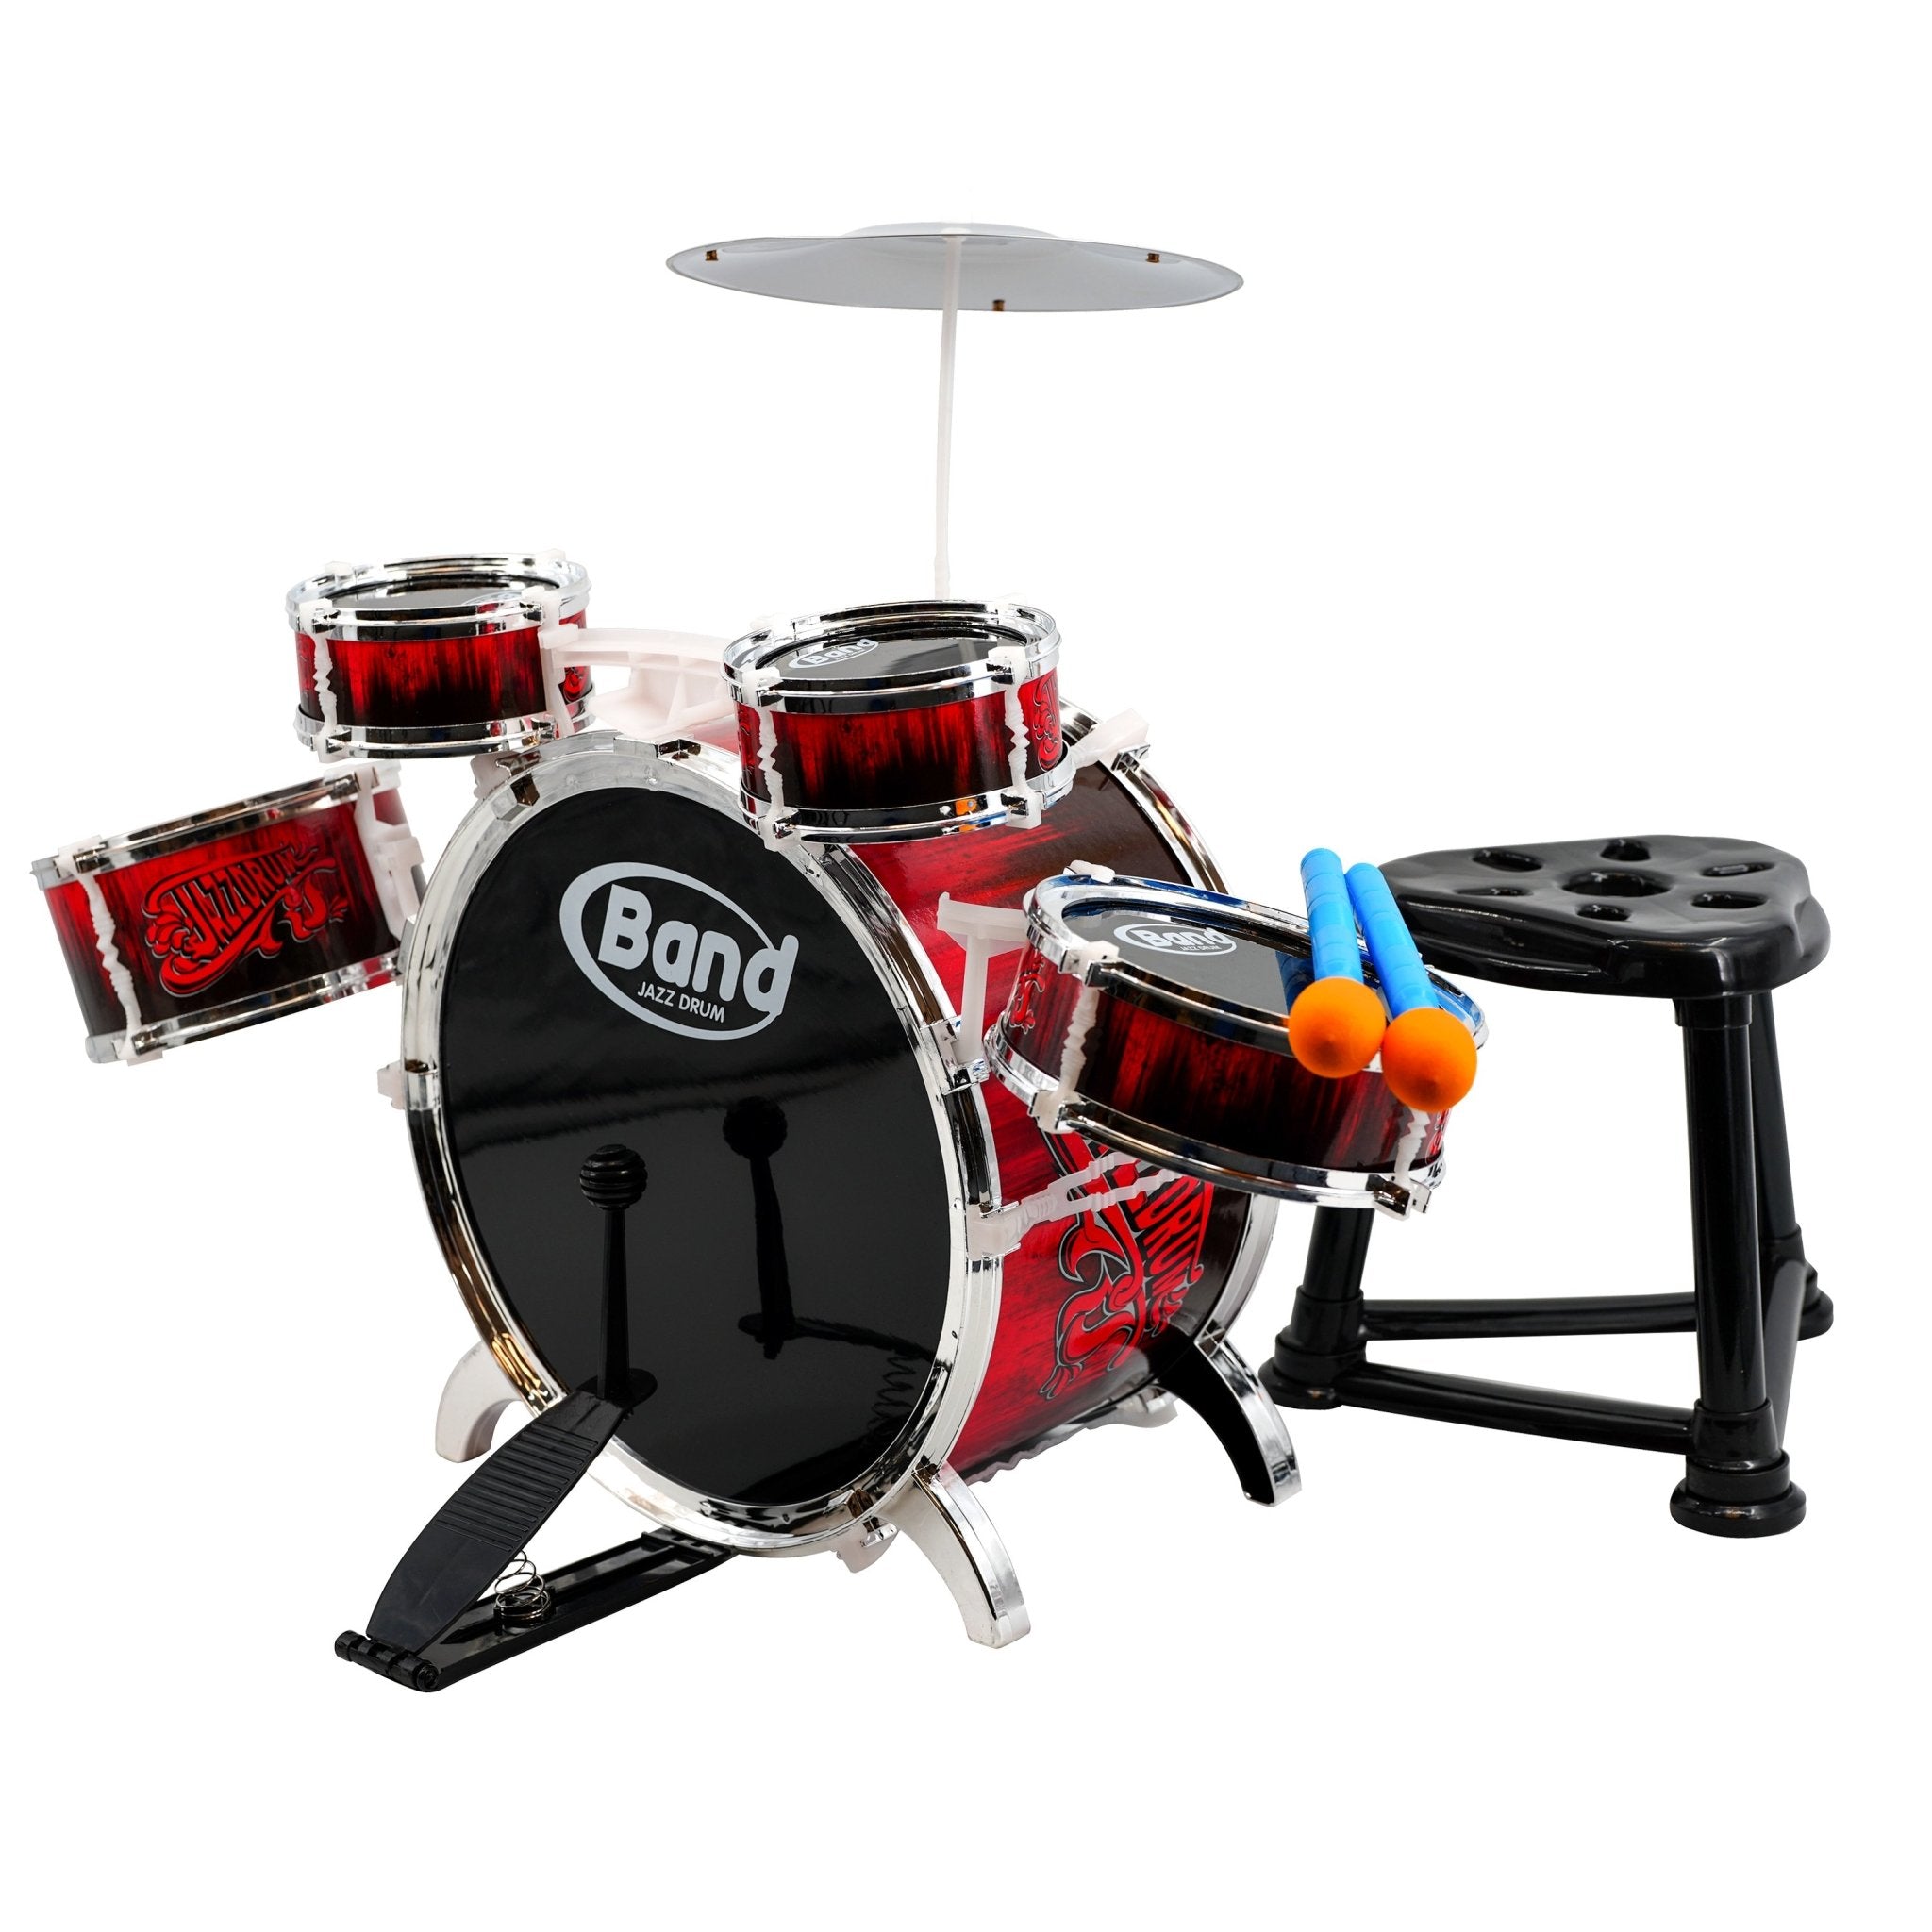 Childs Drum Playset Kit With Stool The Magic Toy Shop - The Magic Toy Shop